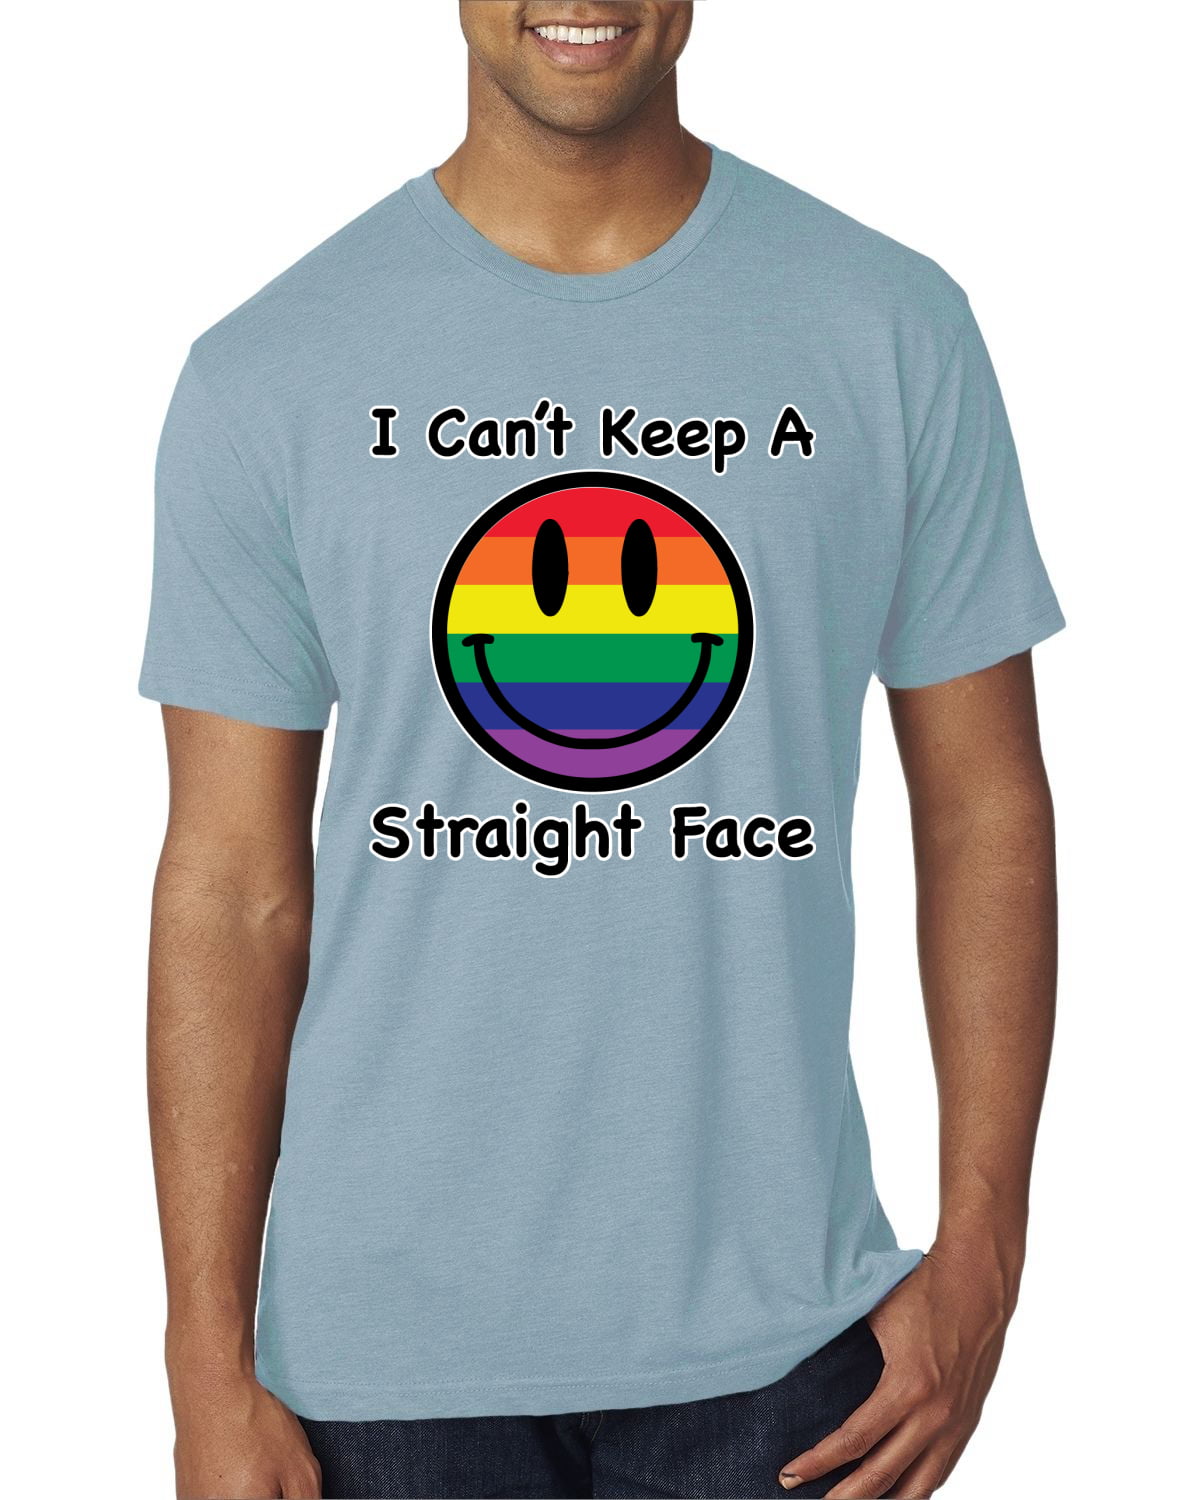 Lesbian Gay Pride T-Shirt LGBT Clothing I Can't Keep a Straight Face Smiley 